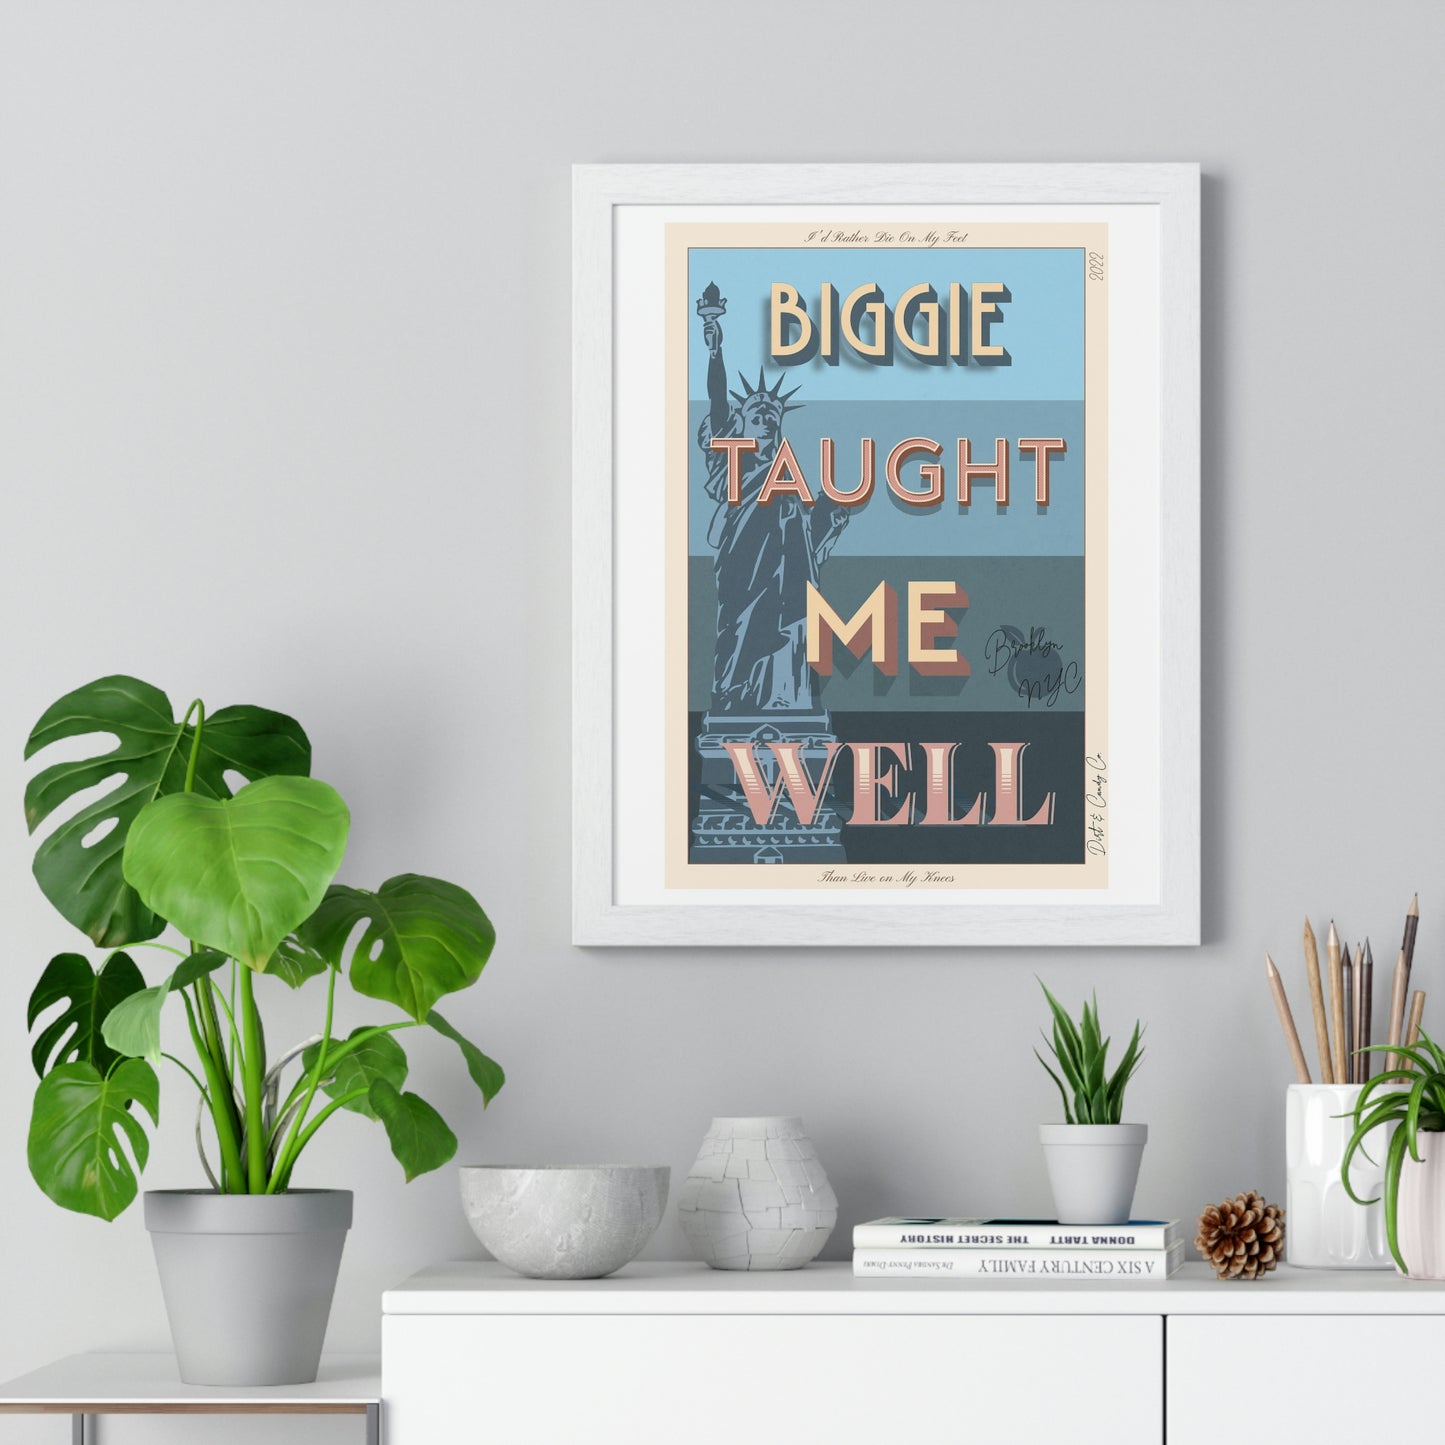 Biggie taught me well:"I'd rather die on my feet, than die on my knees" Stylish poster artwork for any room.  Premium Framed Vertical Poster